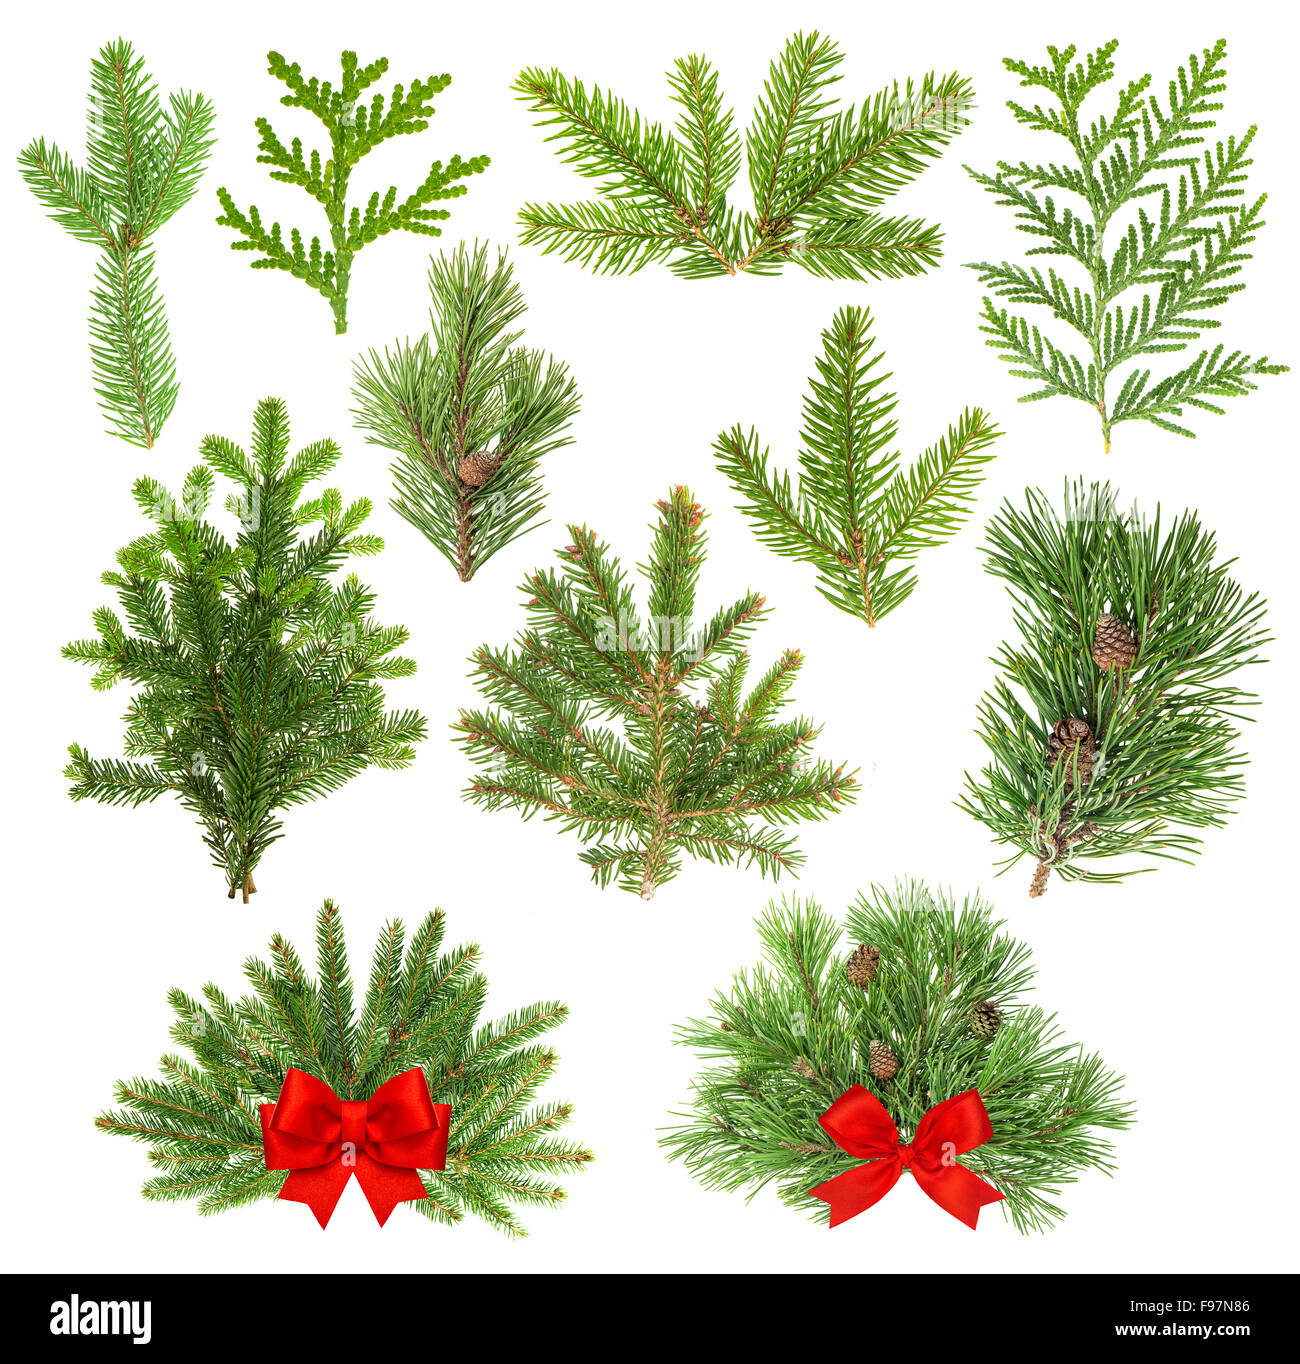 Set of evergreen coniferous tree branches isolated on white background. Christmas decoration with red ribbon bow Stock Photo